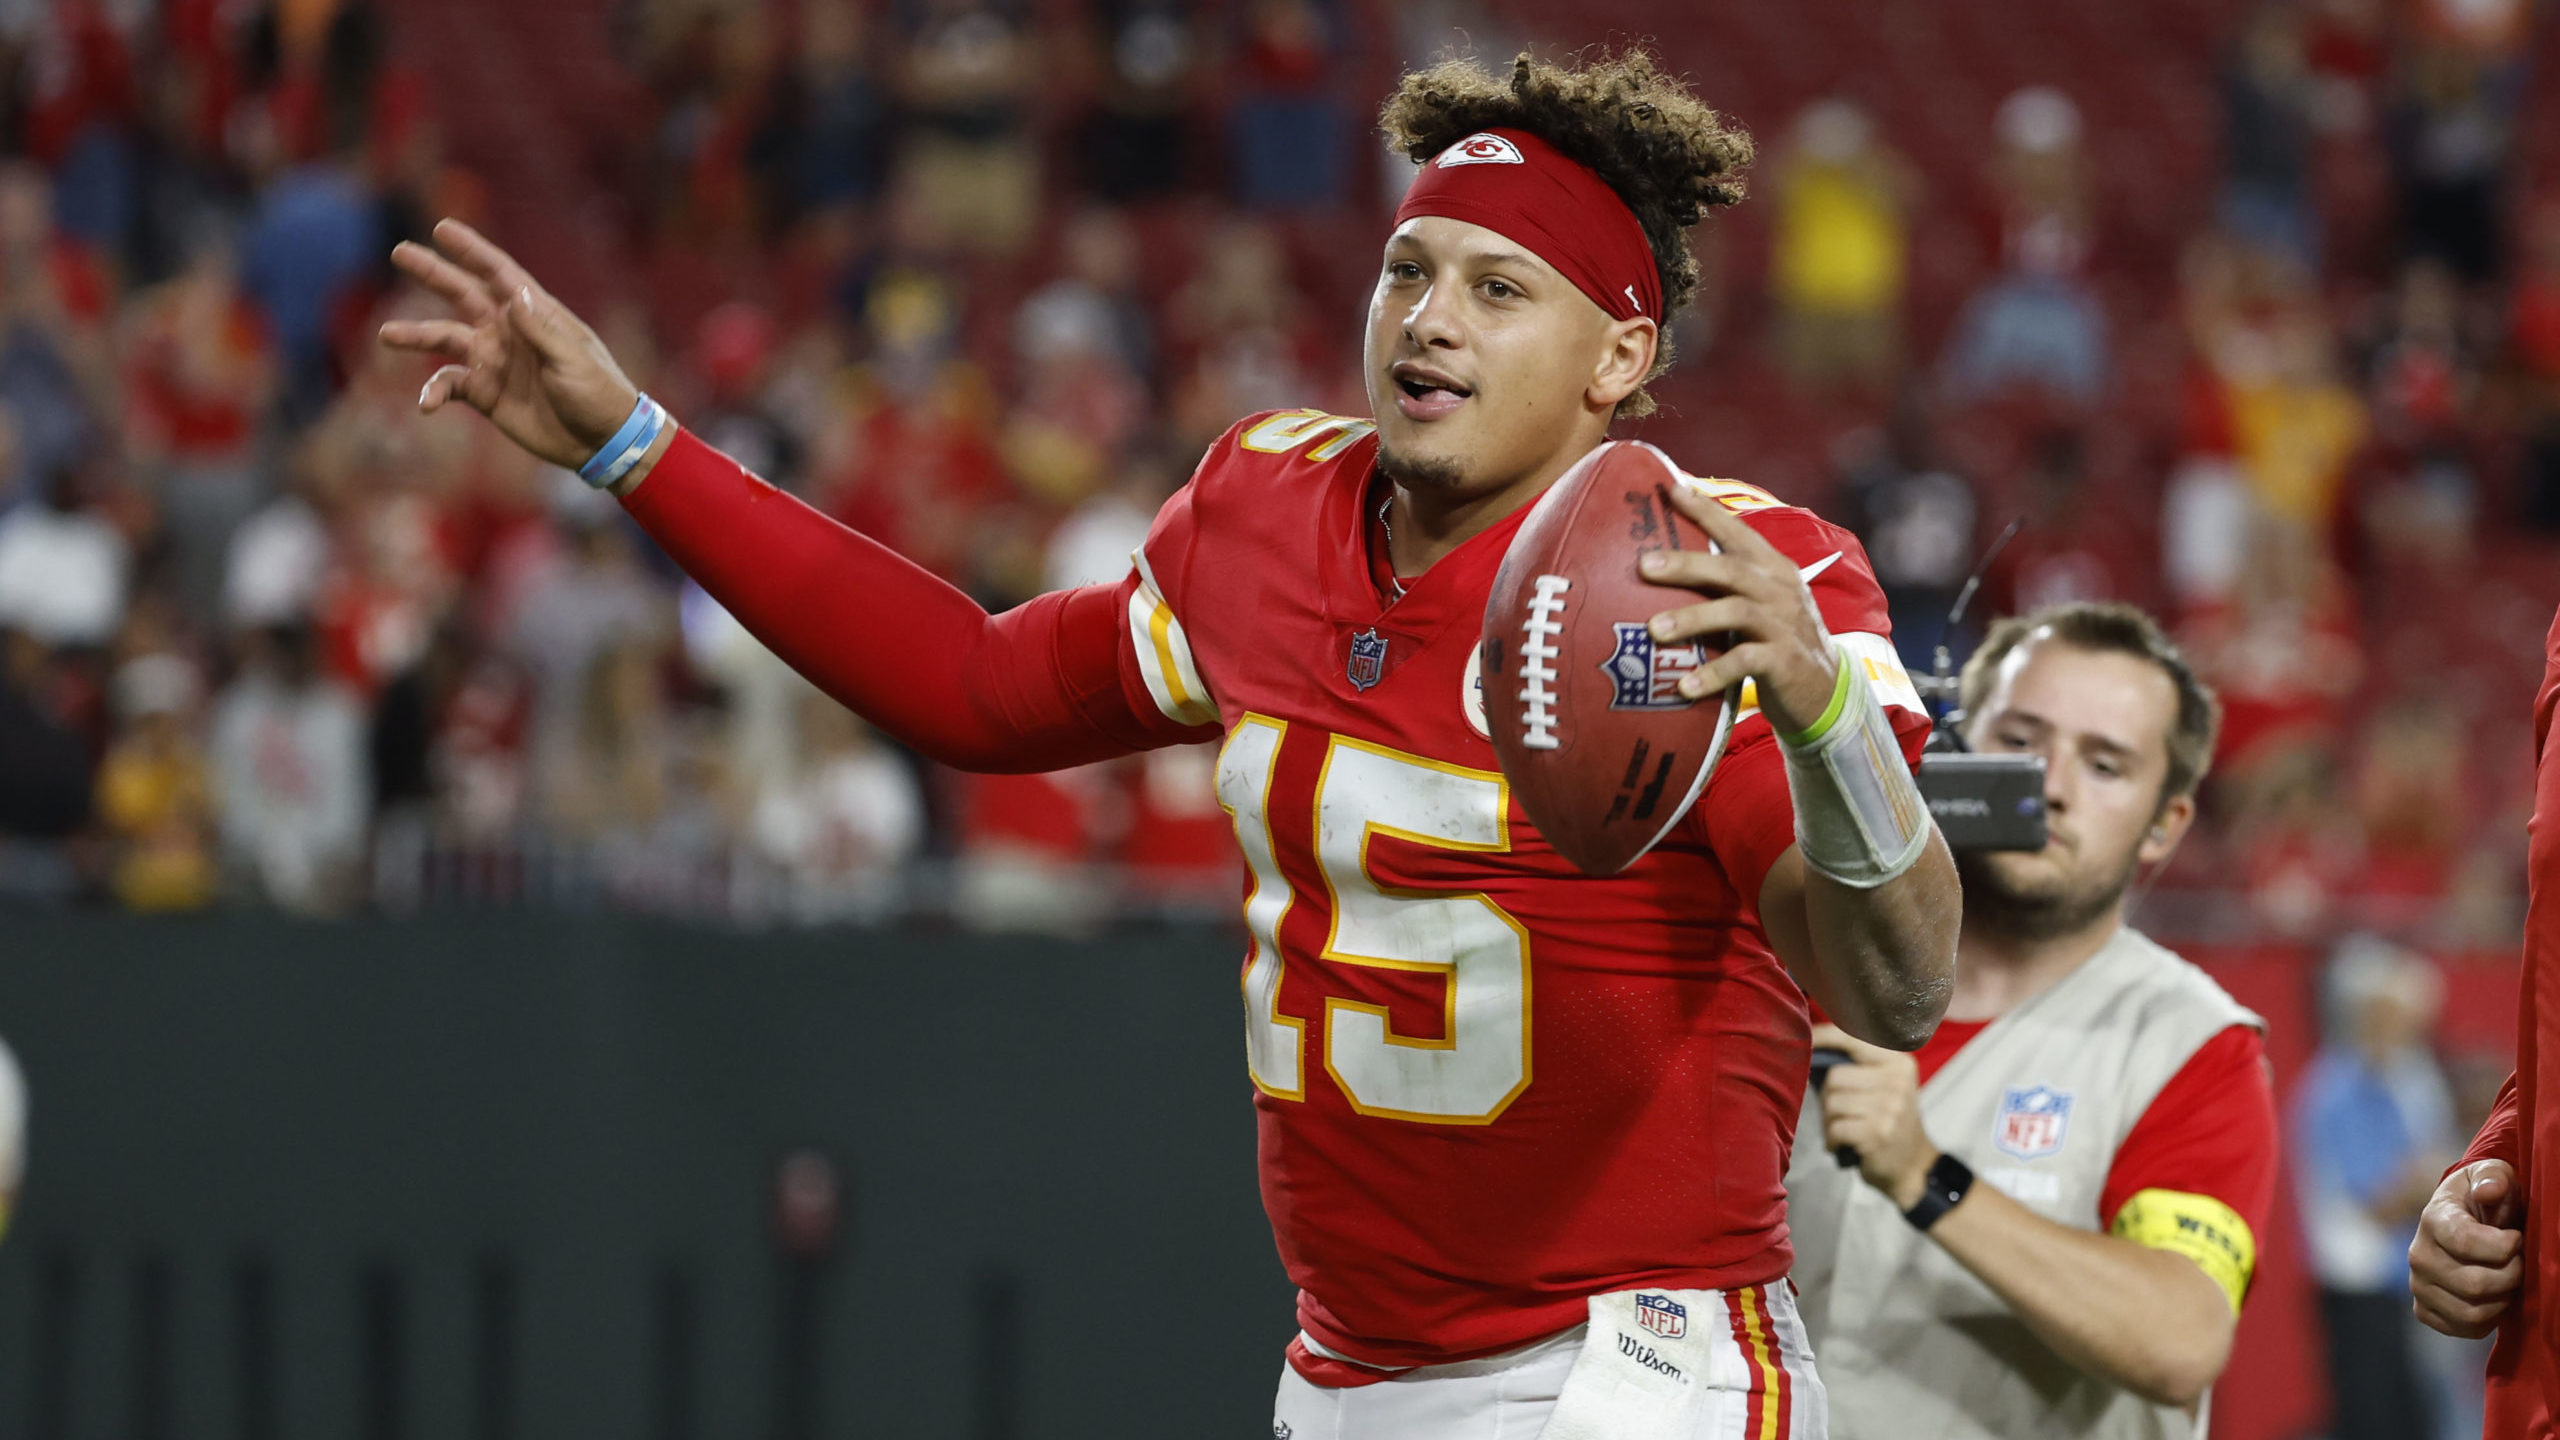 Patrick Mahomes contract restructure